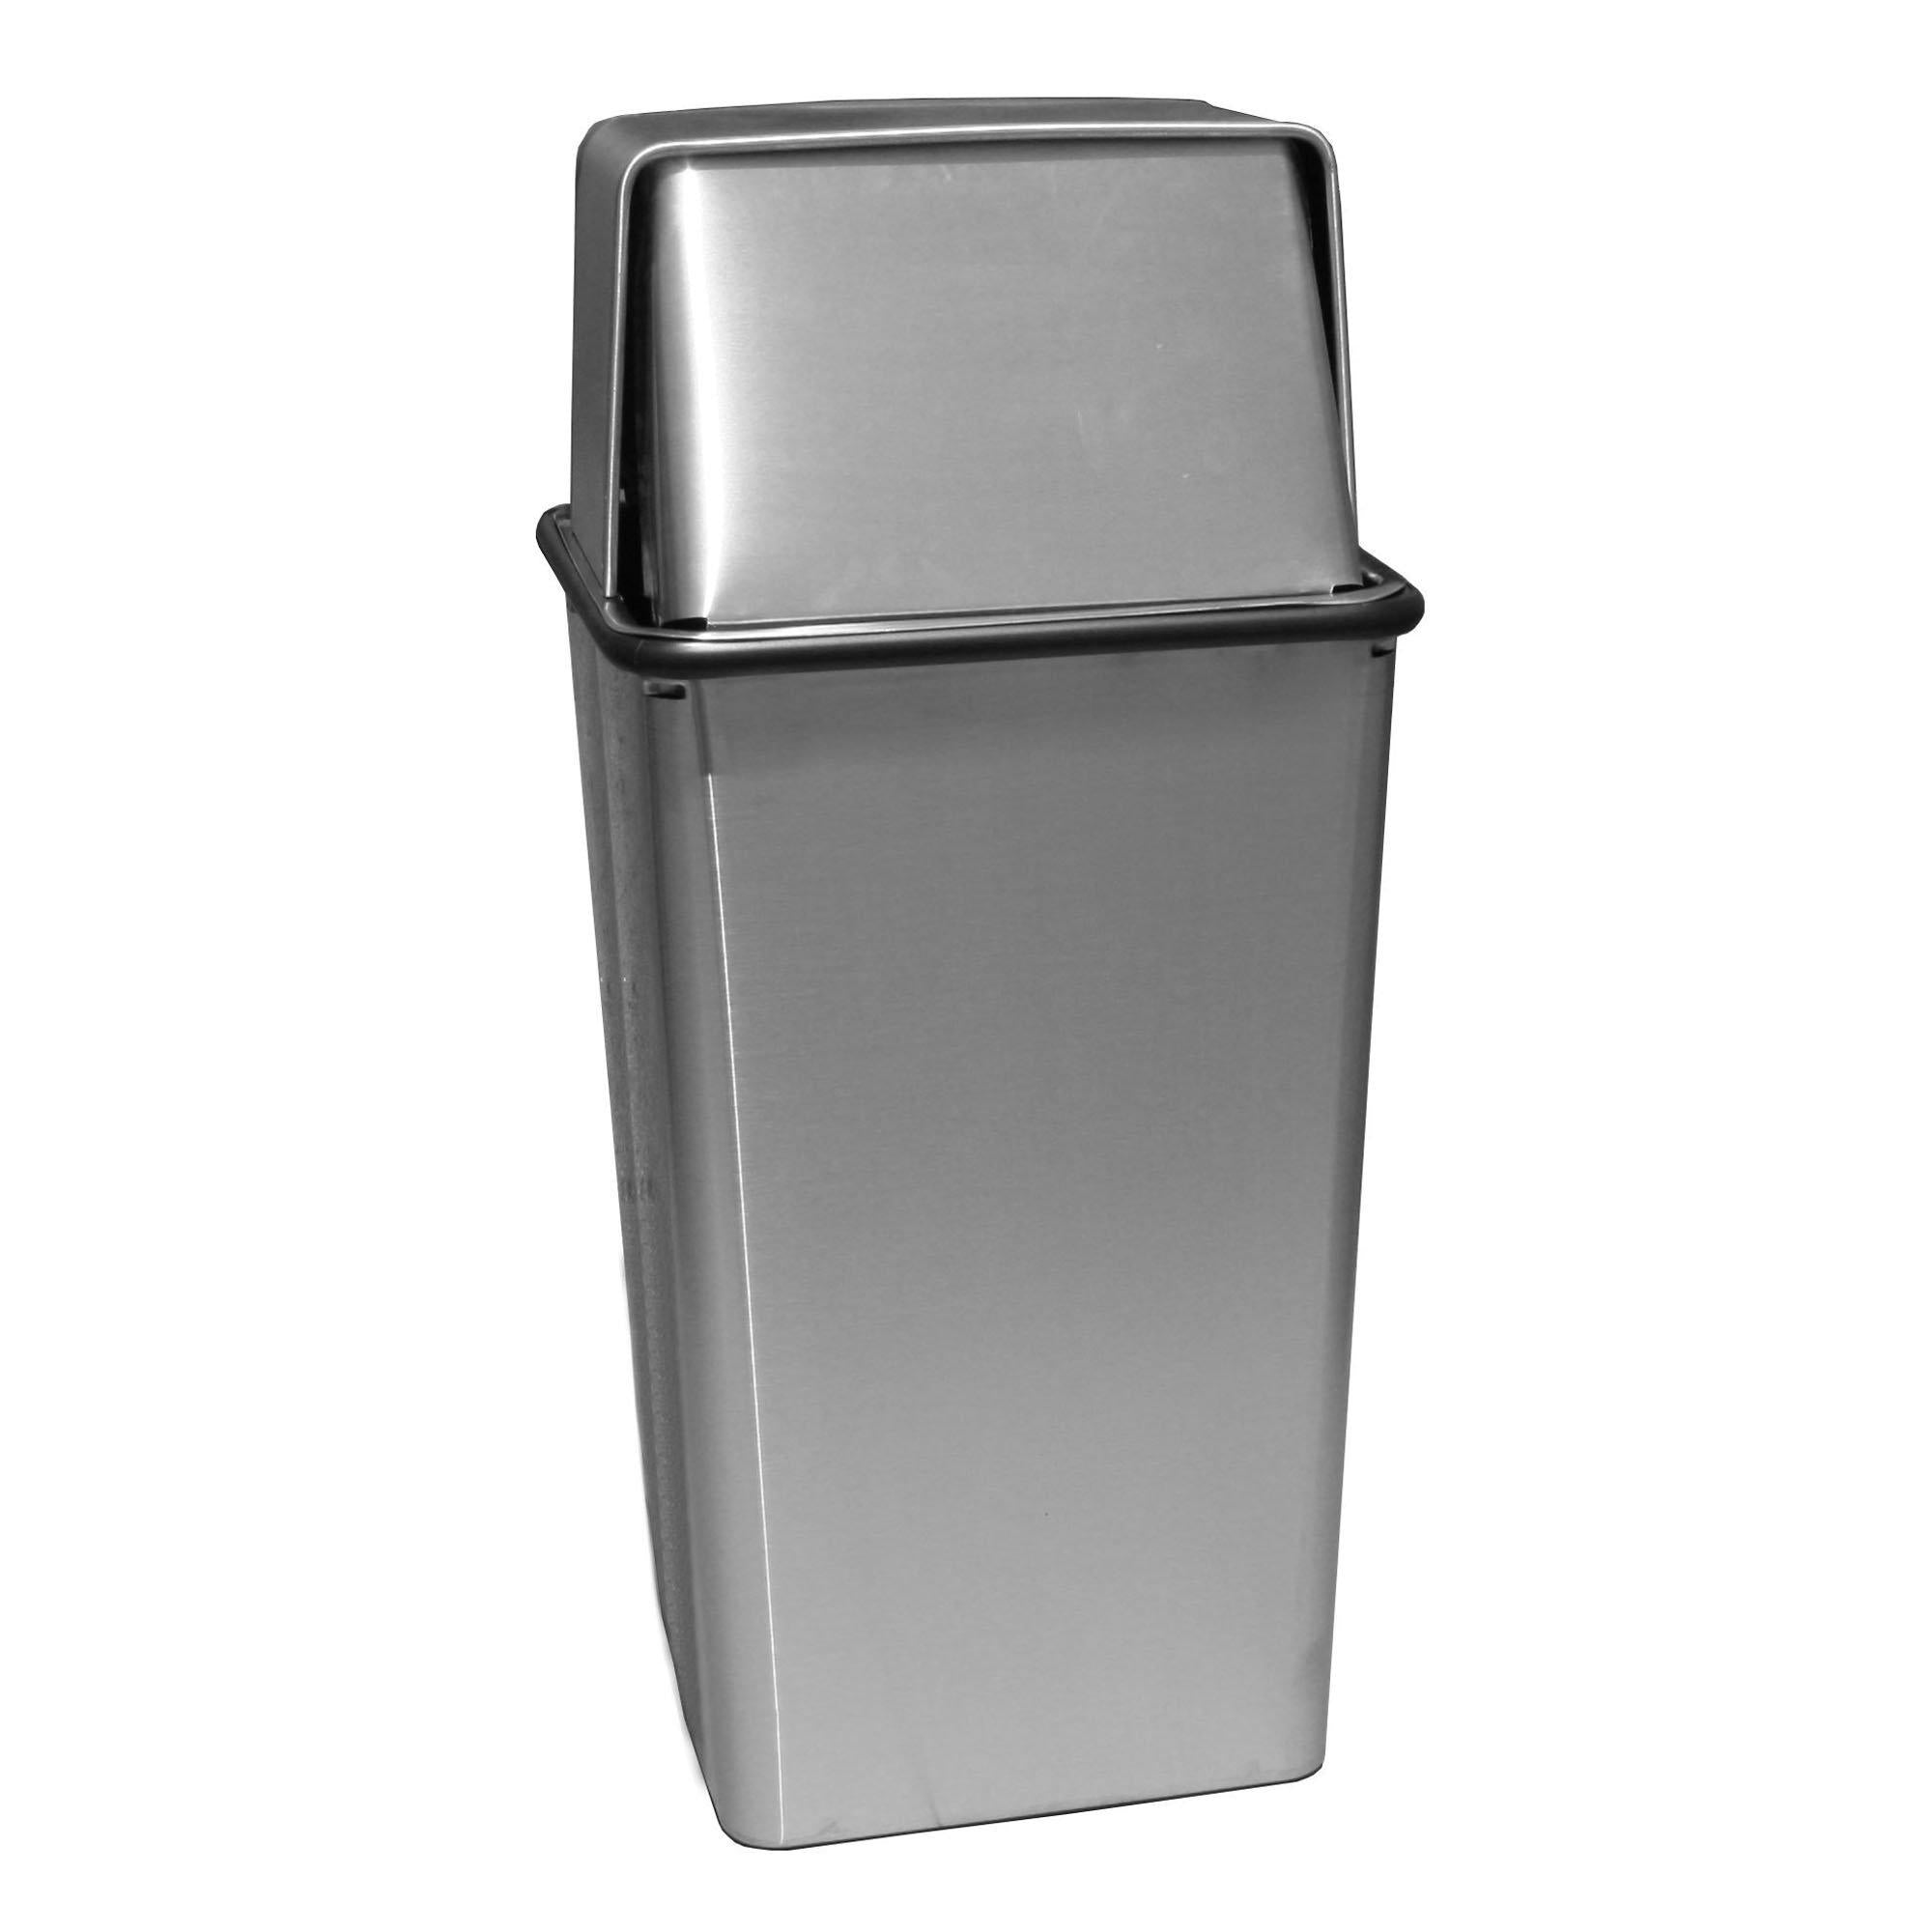 Waste Watcher Stainless Steel Push Top Waste Receptacle, 13 Gallon Capacity